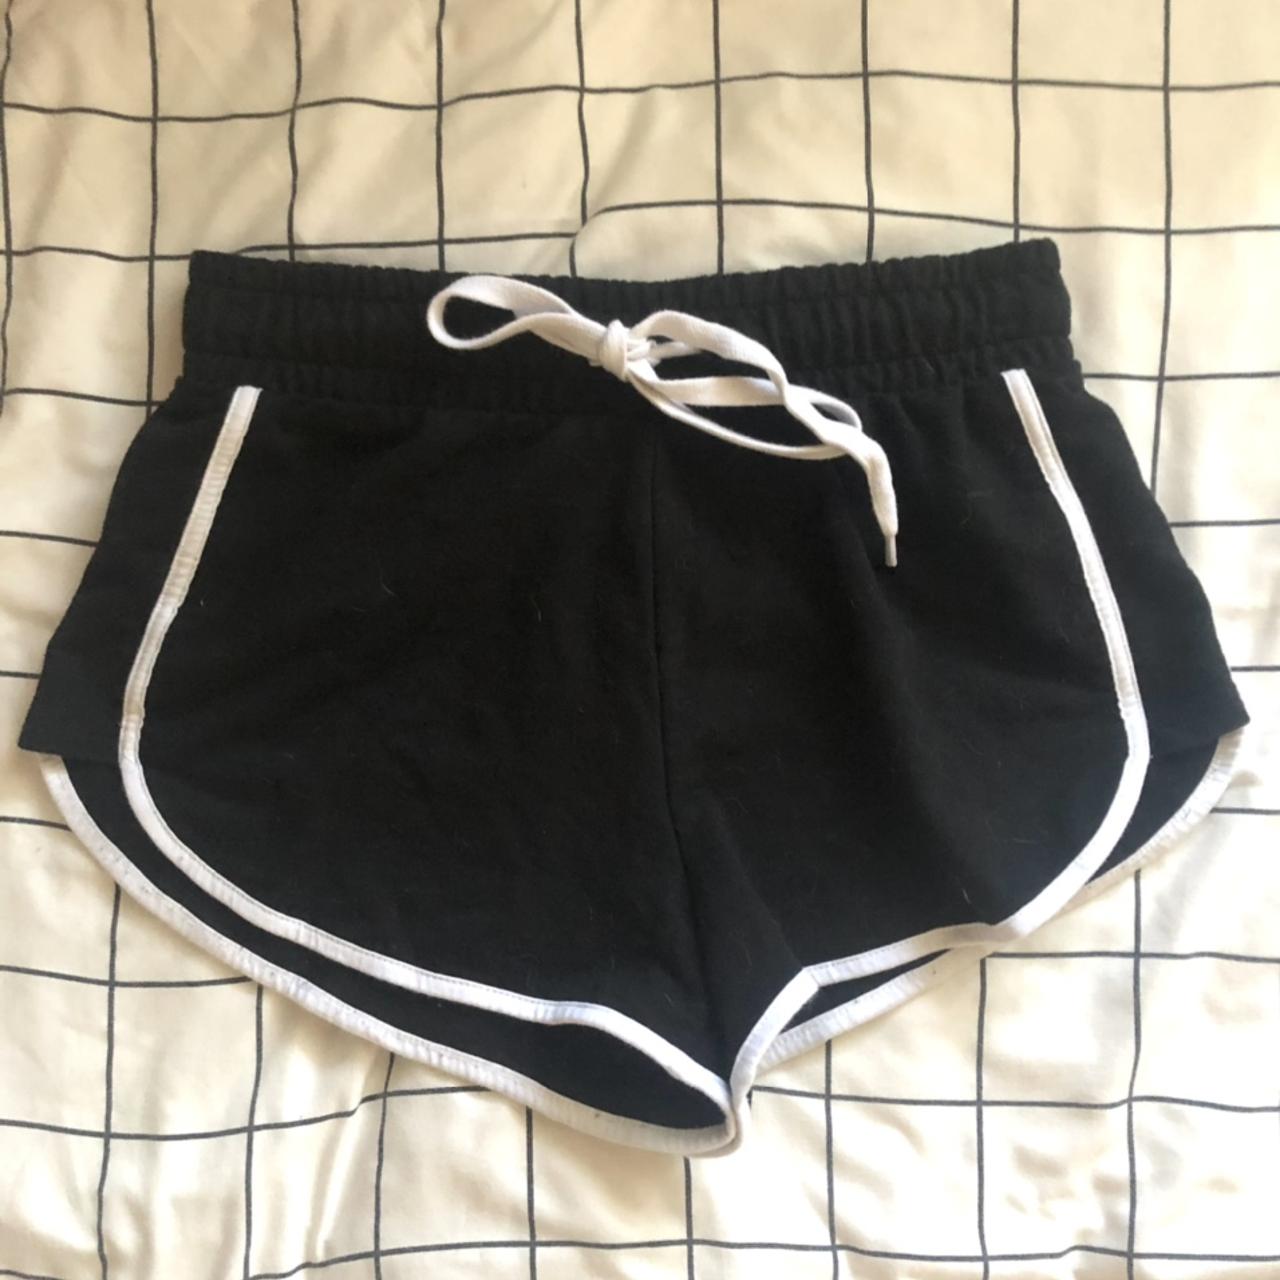 Black shorts with a white outline - Depop